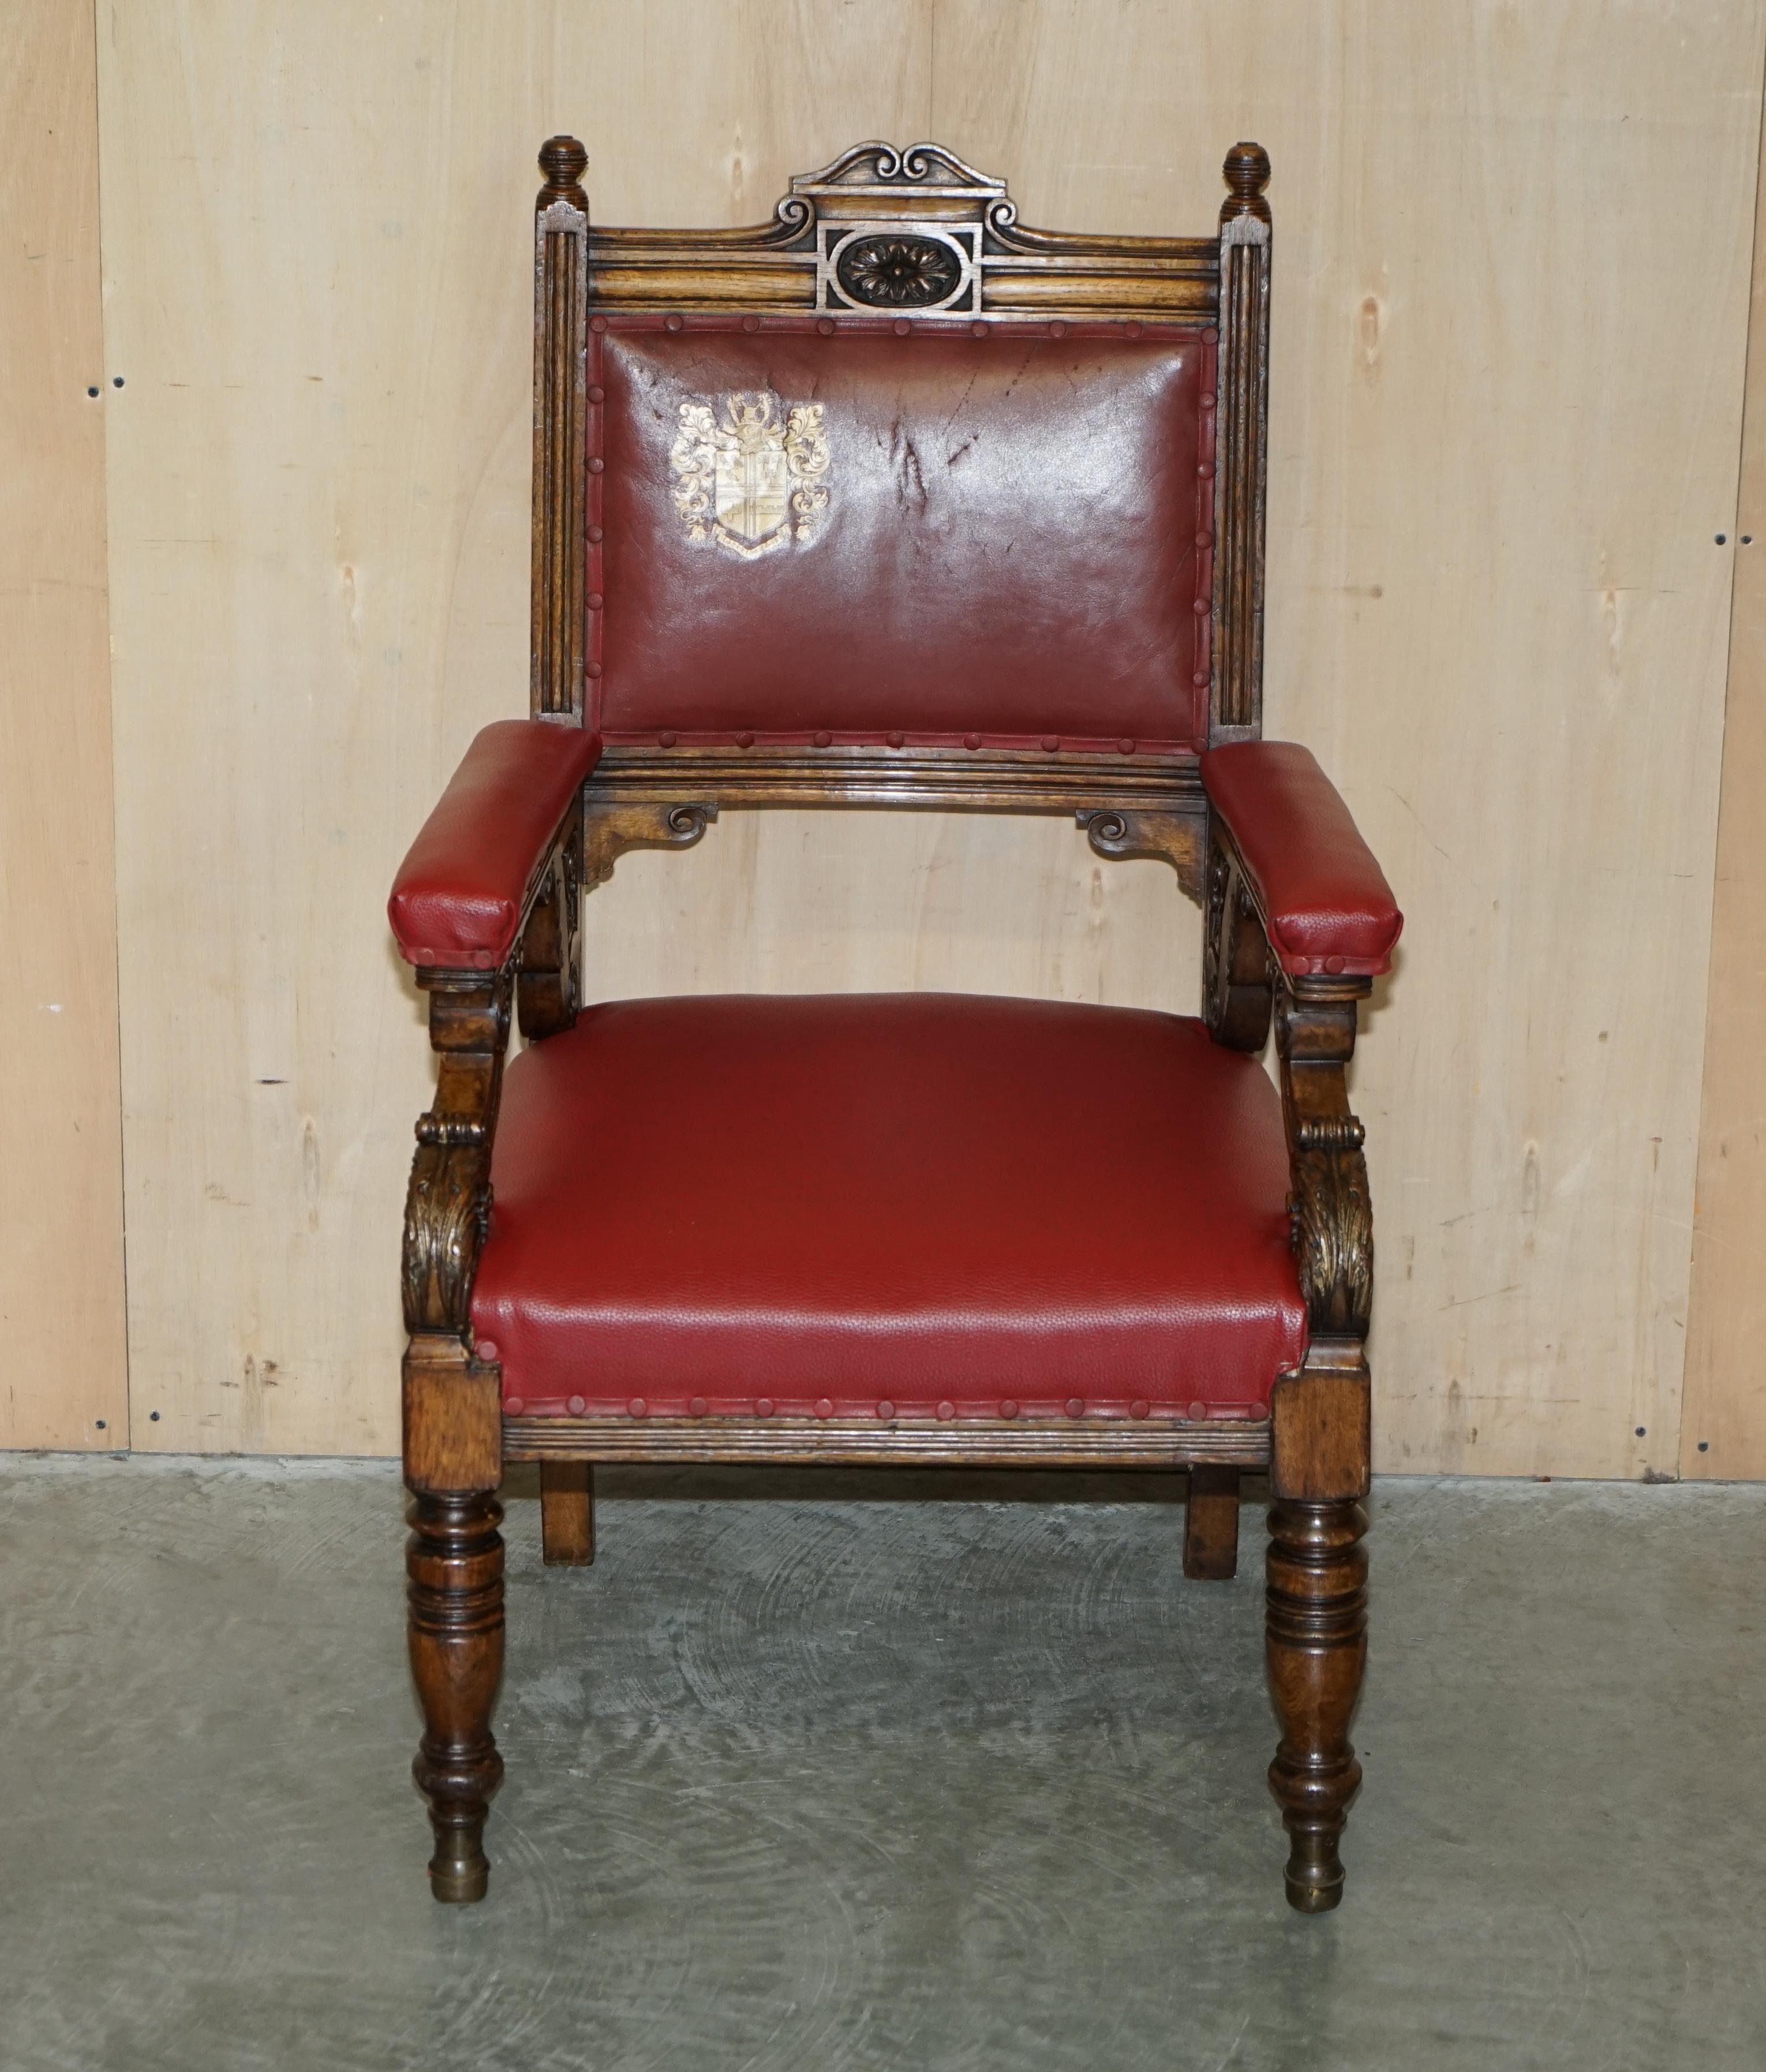 We are delighted to offer for sale this lovely original Victorian heavily carved English Oak armchair with Royal coat of arms / armorial crest

This is a very decorative piece, it looks like a throne armchair but is of normal proportions as appose